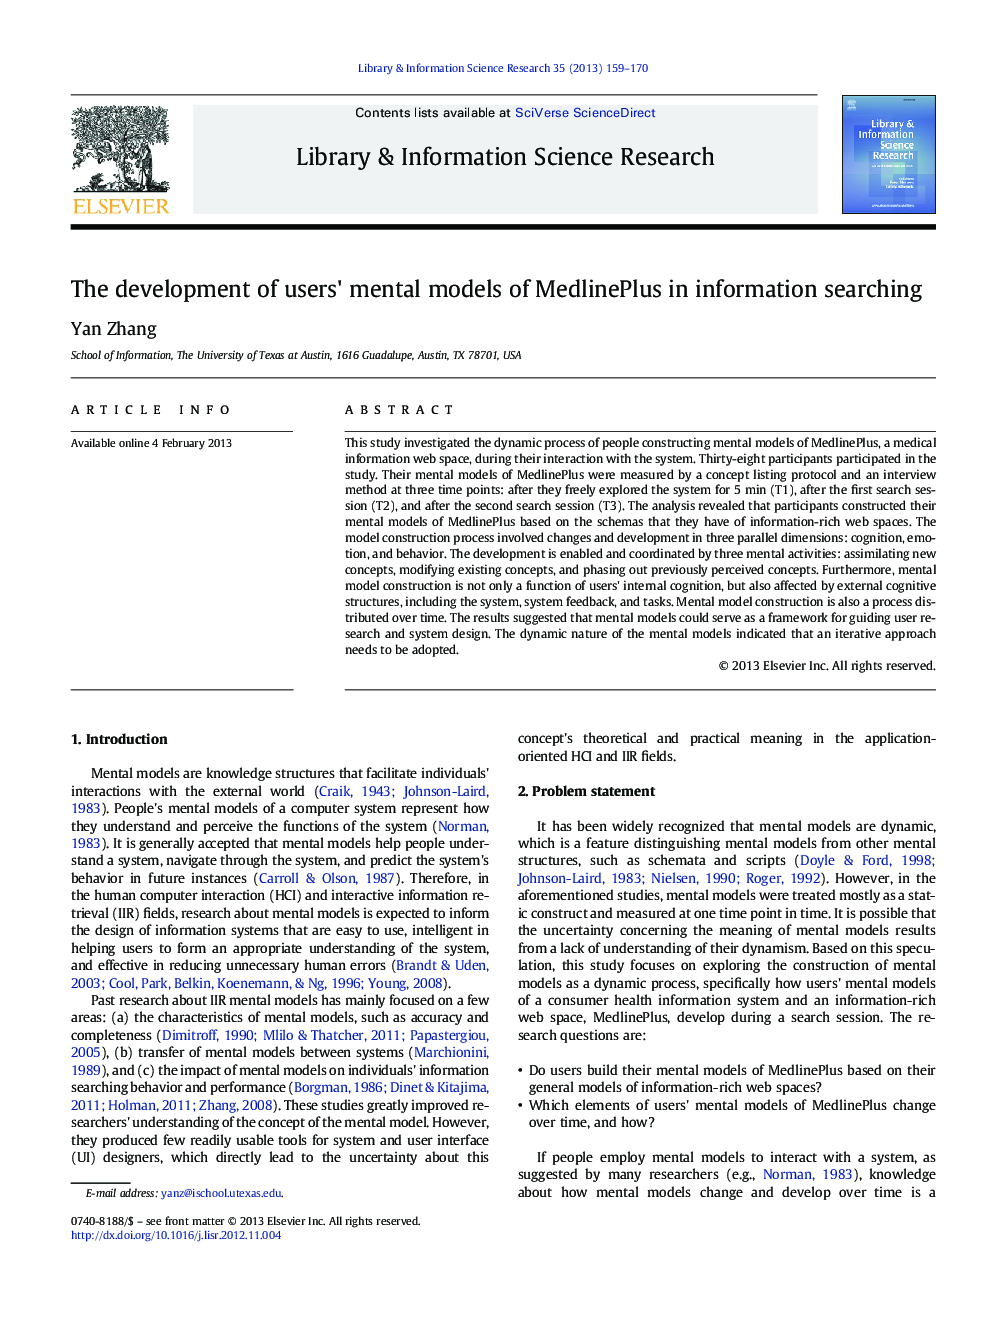 The development of users' mental models of MedlinePlus in information searching